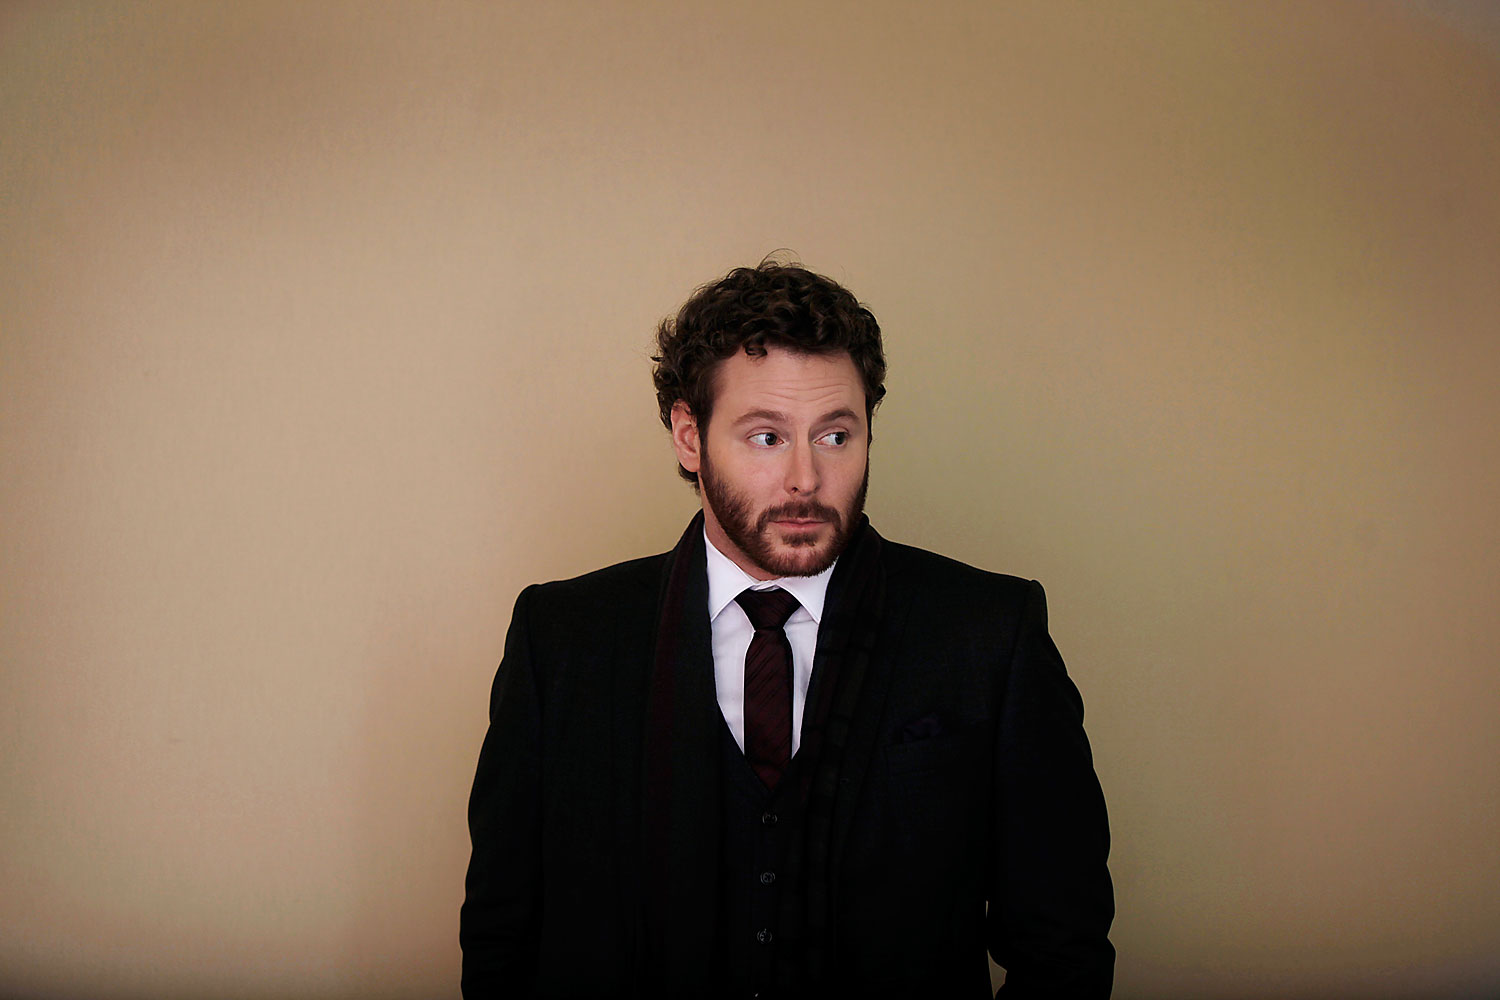 Sean Parker, co-founder of Napster Inc. and managing partner of the Founders Fund, stands for a photograph following a television interview on day three of the World Economic Forum in Davos, Switzerland in 2012 (Simon Dawson—Bloomberg/Getty Images)